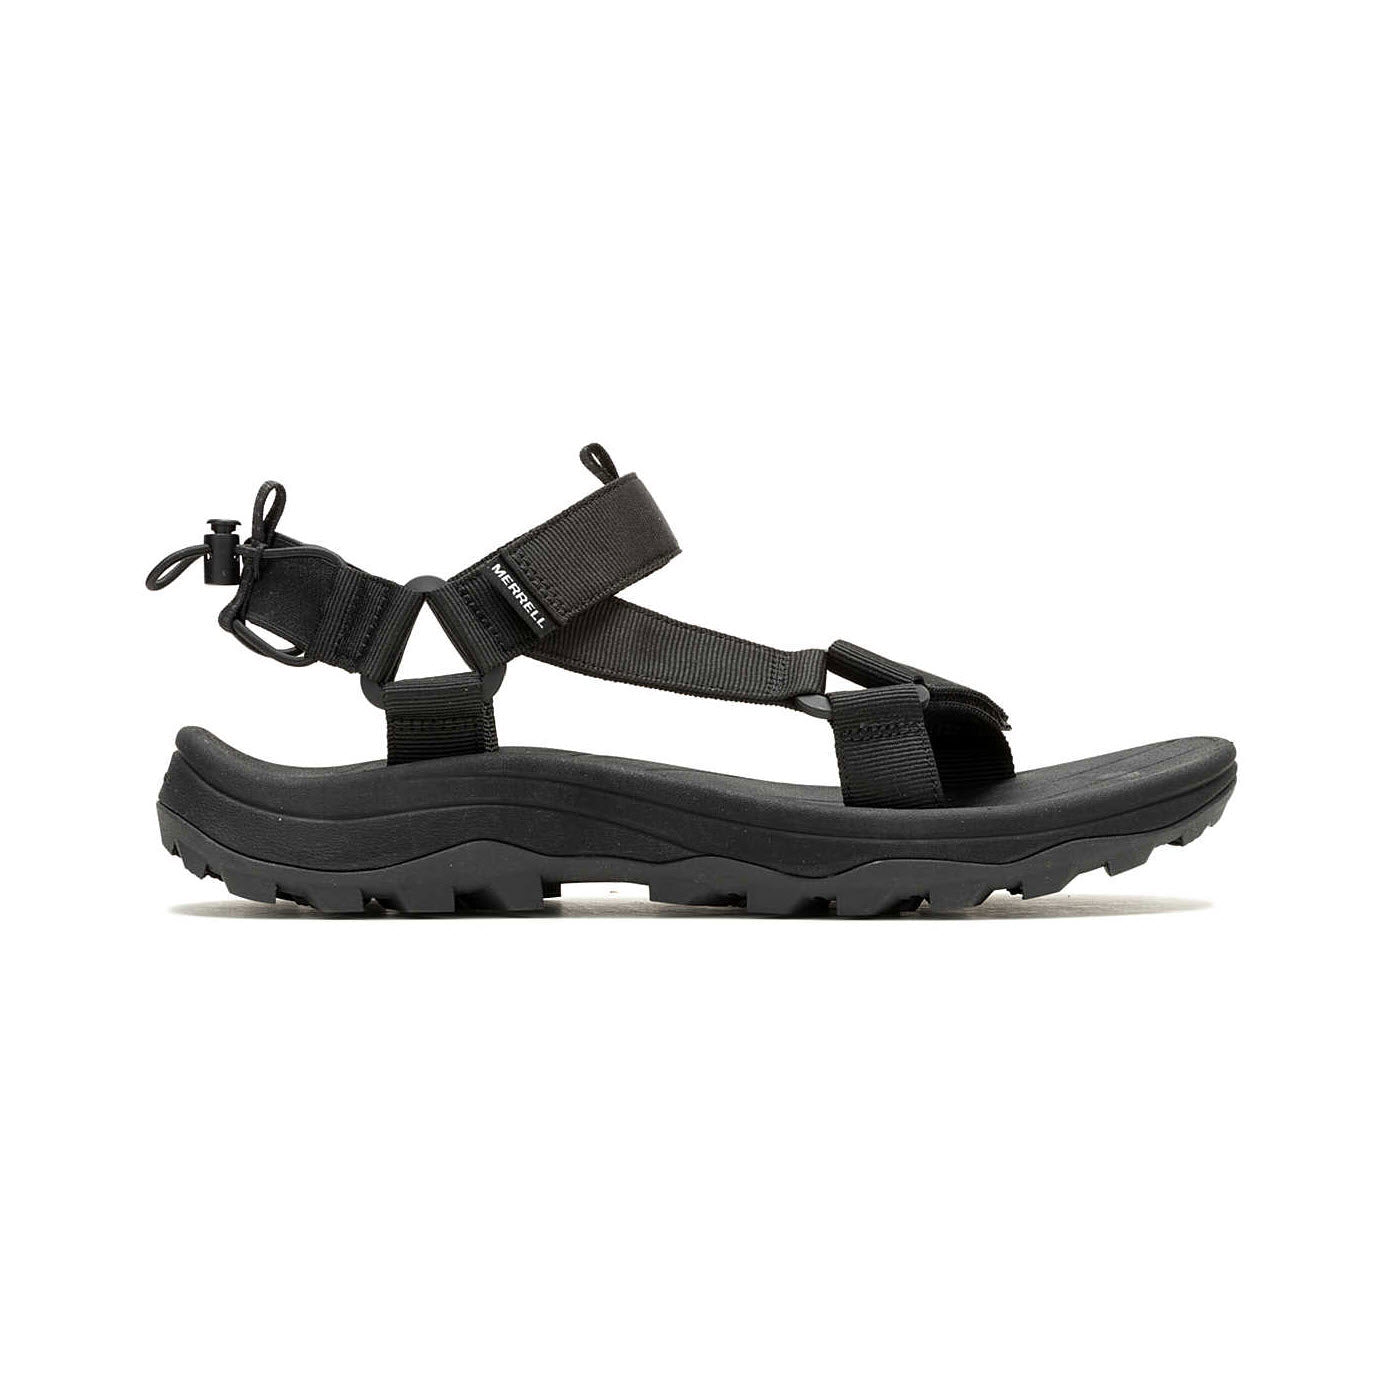 A single black Merrell Speed Fusion Web Sport sandal with adjustable straps, featuring a thick, rugged sole designed for outdoor activities.